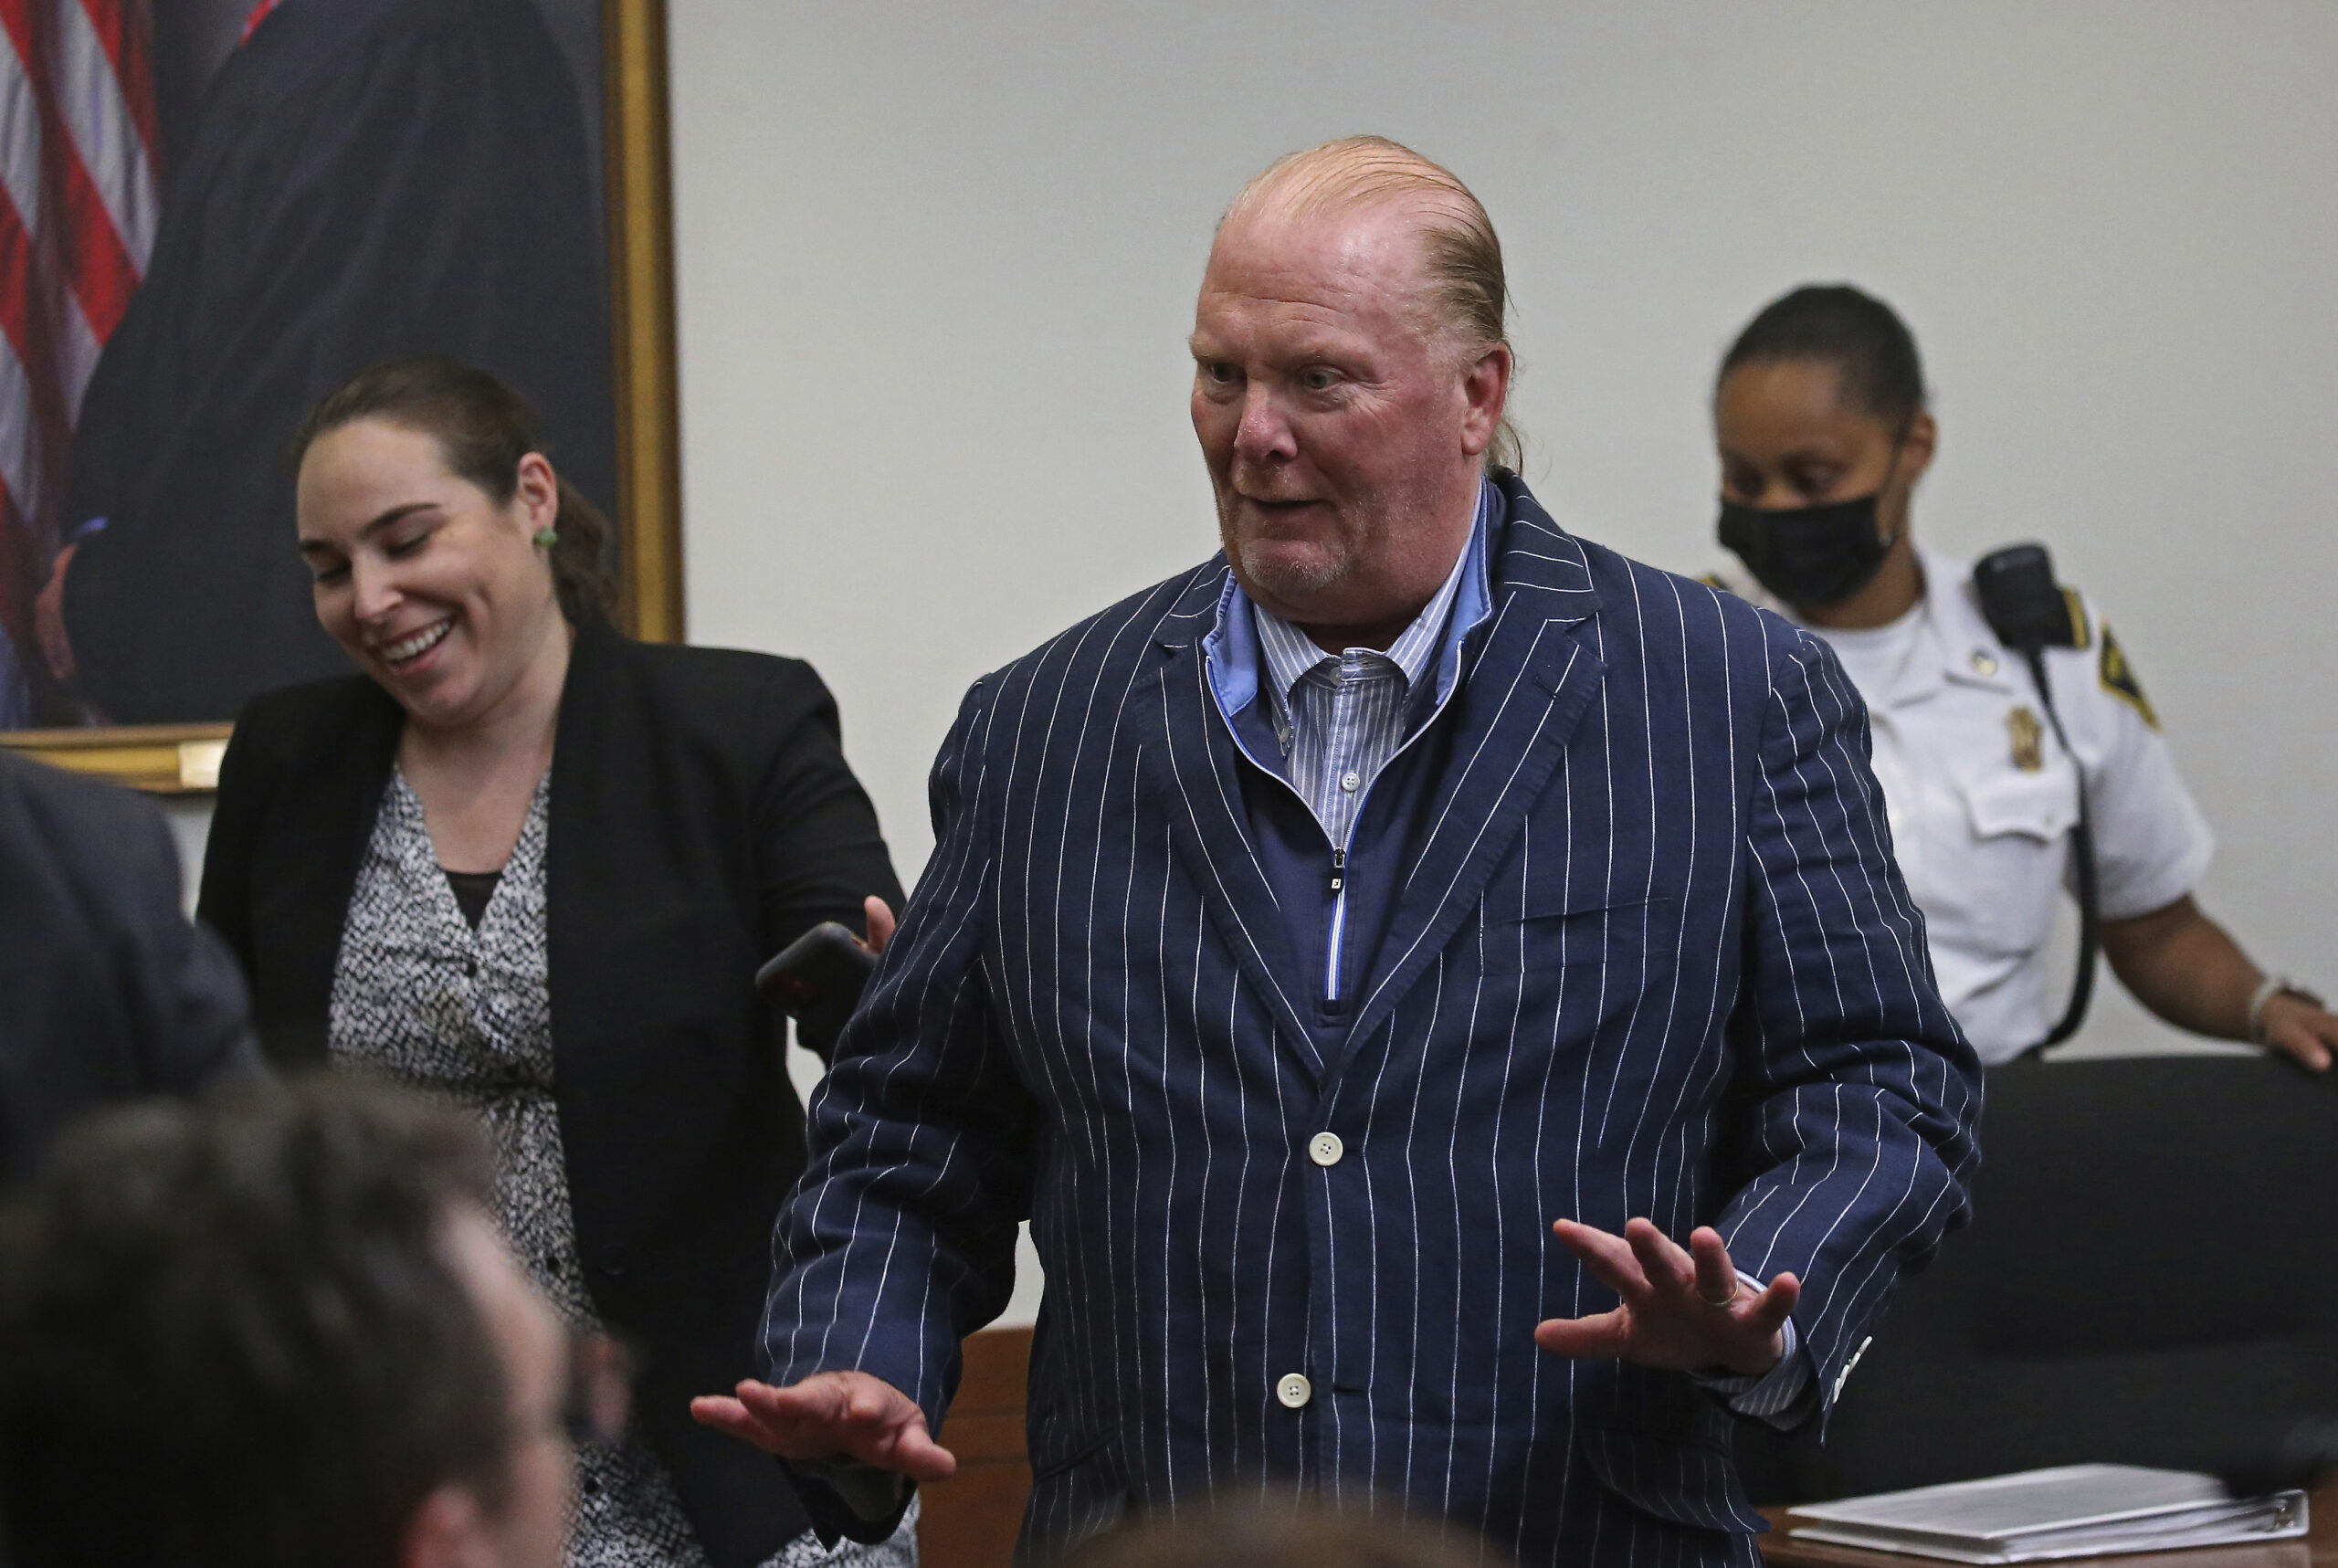 Celebrity chef Mario Batali reacts after being found not guilty of indecent assault and battery at Boston Municipal Court on the second day of his trial, on Tuesday, May 10, 2022 in Boston. Batali, who pleaded not guilty to indecent assault and battery in 2019, had faced up to 2 1/2 years in jail and would’ve been required to register as a sex offender if convicted. (Stuart Cahill/The Boston Herald via AP, Pool)